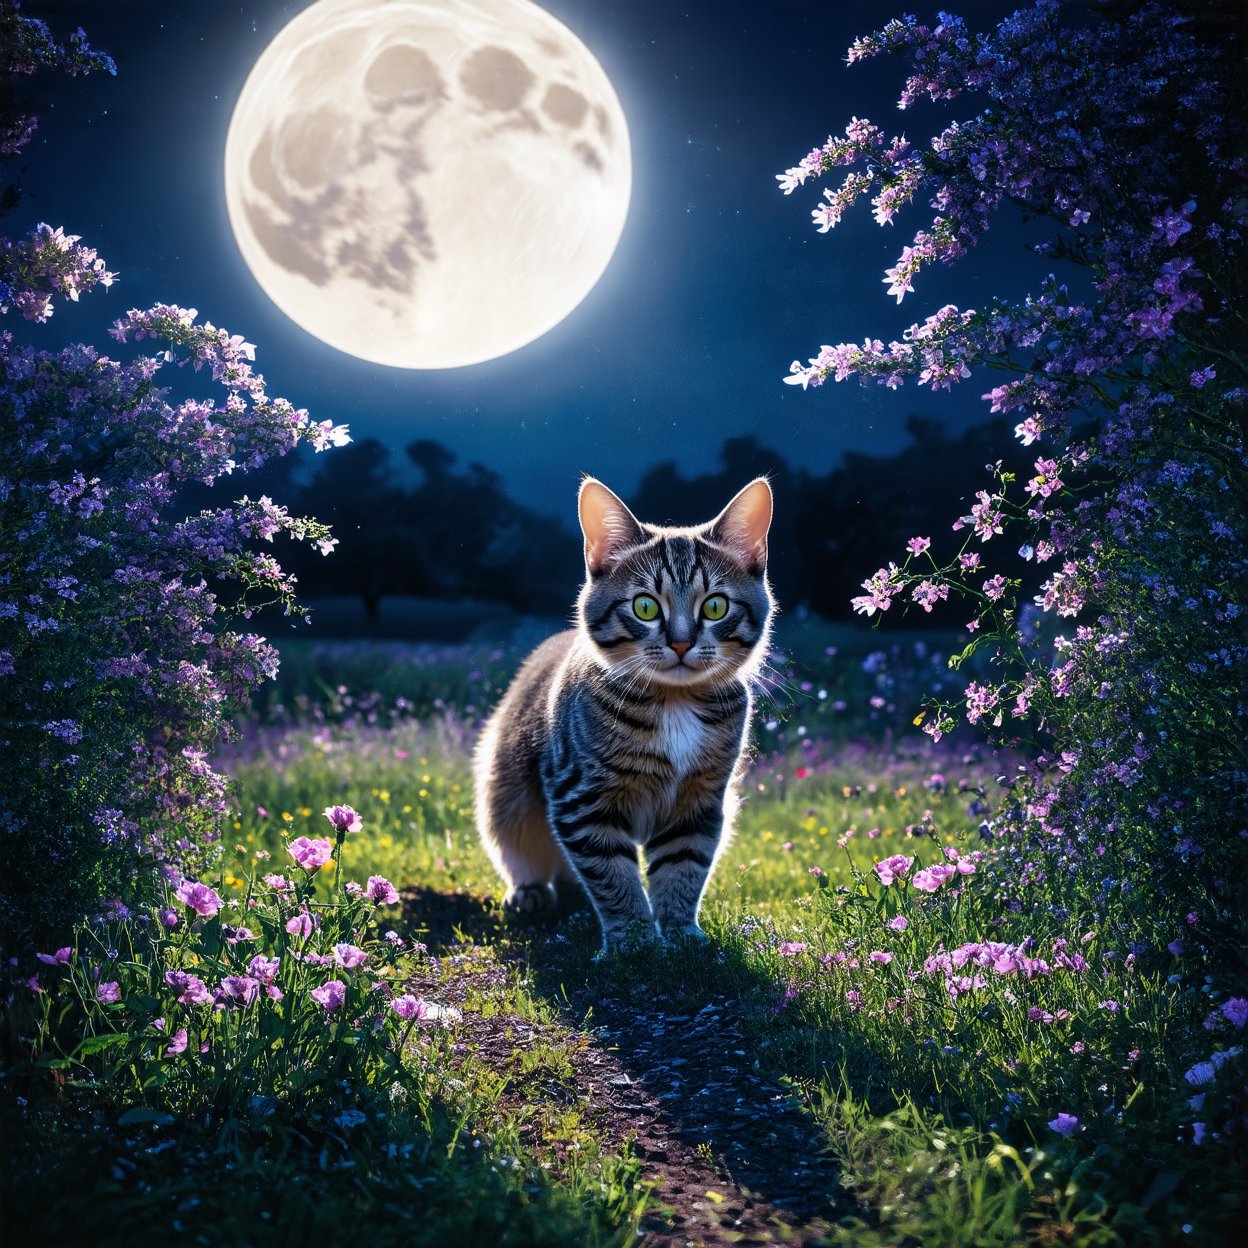 In the moonlit garden, a lone cat wanders amidst blooming flowers, bathed in the ethereal glow of the moon. Shadows dance and the soft, warm light casts an eerie, surreal aura over the scene. The cat's eyes reflect a mysterious blend of serenity and harmony, as if guarding secrets only the night can whisper. The rich hues of deep blues and purples contrast with the delicate petals, creating a harmonious yet haunting tableau, blending reality with a touch of fantasy.